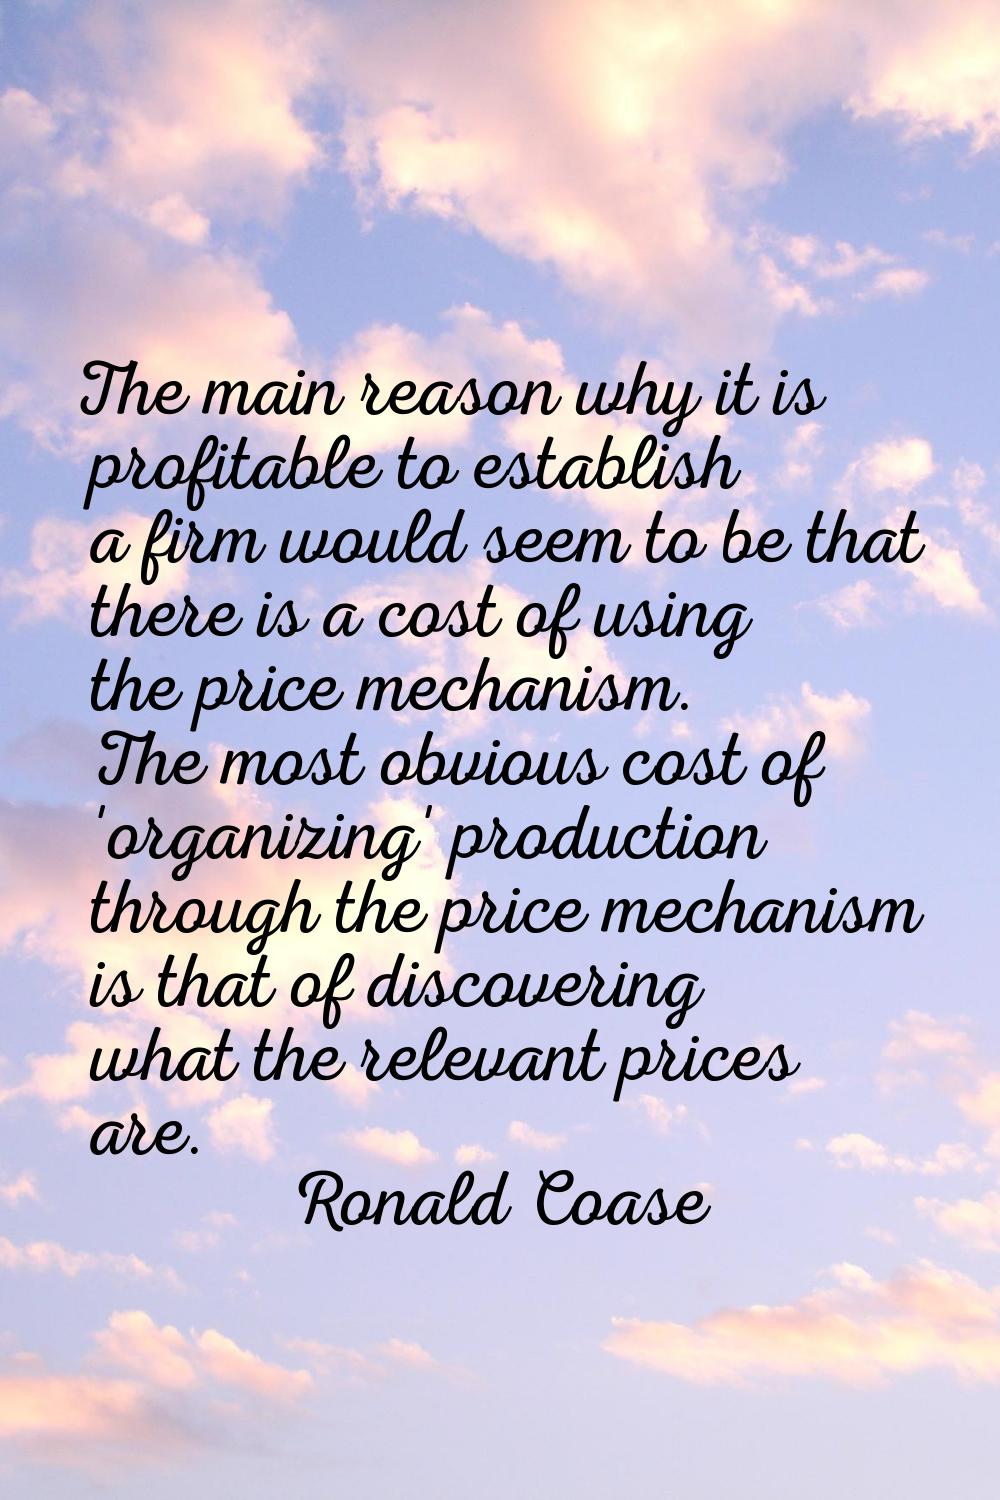 The main reason why it is profitable to establish a firm would seem to be that there is a cost of u